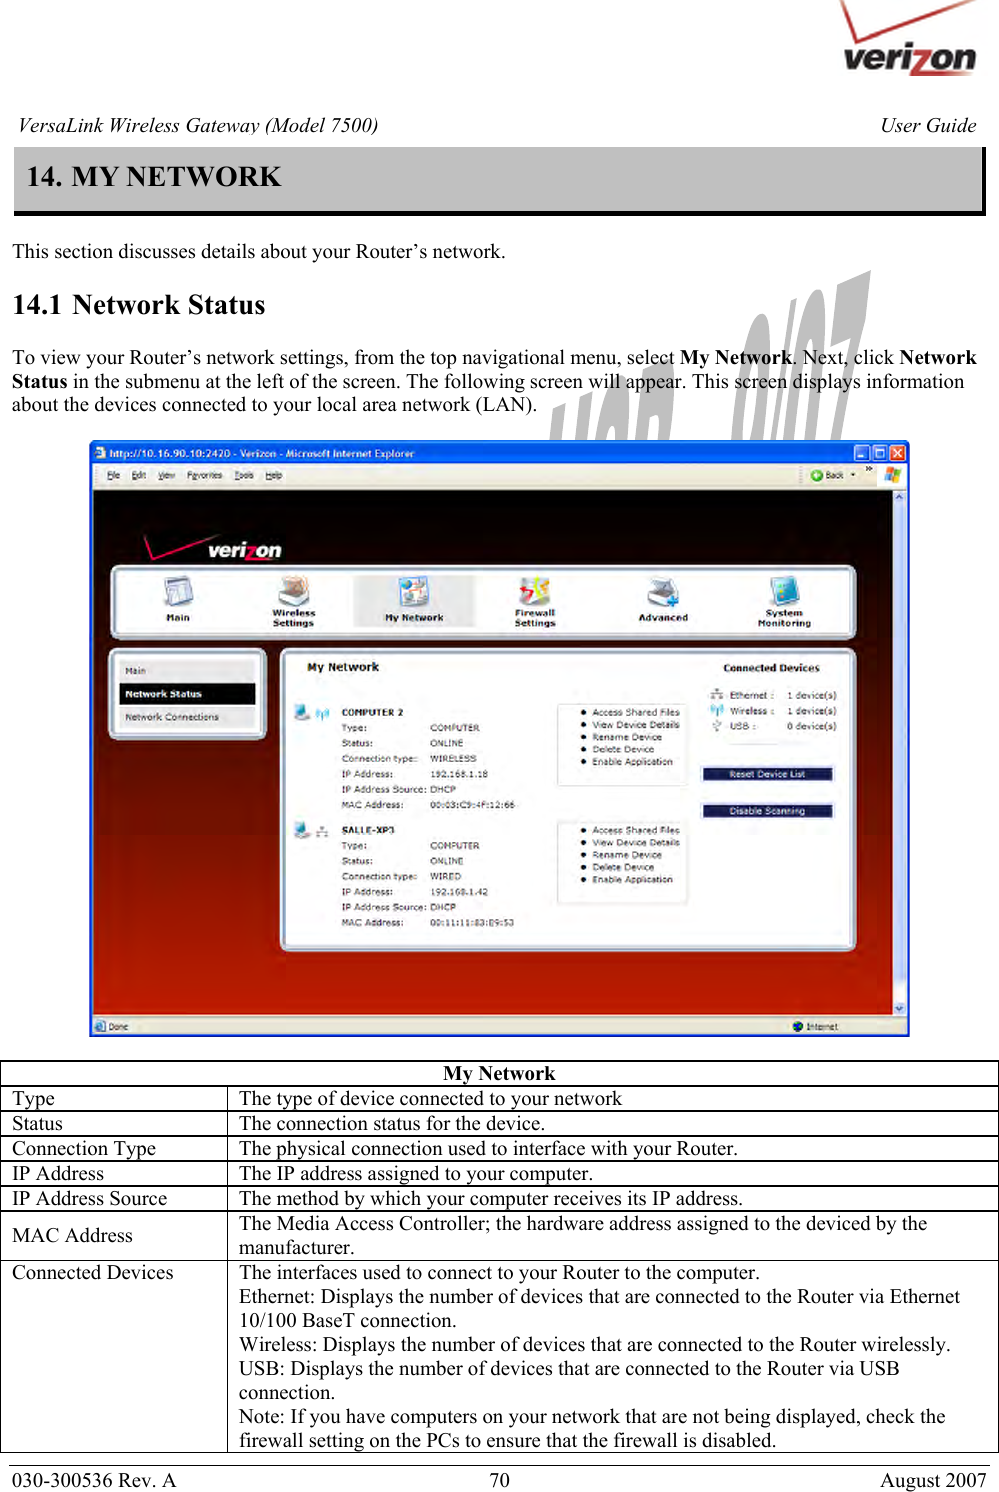       030-300536 Rev. A  70       August 2007 User GuideVersaLink Wireless Gateway (Model 7500)14. MY NETWORK  This section discusses details about your Router’s network.  14.1 Network Status  To view your Router’s network settings, from the top navigational menu, select My Network. Next, click Network Status in the submenu at the left of the screen. The following screen will appear. This screen displays information about the devices connected to your local area network (LAN).     My Network Type  The type of device connected to your network Status  The connection status for the device. Connection Type  The physical connection used to interface with your Router. IP Address   The IP address assigned to your computer. IP Address Source  The method by which your computer receives its IP address. MAC Address  The Media Access Controller; the hardware address assigned to the deviced by the manufacturer.  Connected Devices  The interfaces used to connect to your Router to the computer. Ethernet: Displays the number of devices that are connected to the Router via Ethernet 10/100 BaseT connection. Wireless: Displays the number of devices that are connected to the Router wirelessly. USB: Displays the number of devices that are connected to the Router via USB connection. Note: If you have computers on your network that are not being displayed, check the firewall setting on the PCs to ensure that the firewall is disabled. 